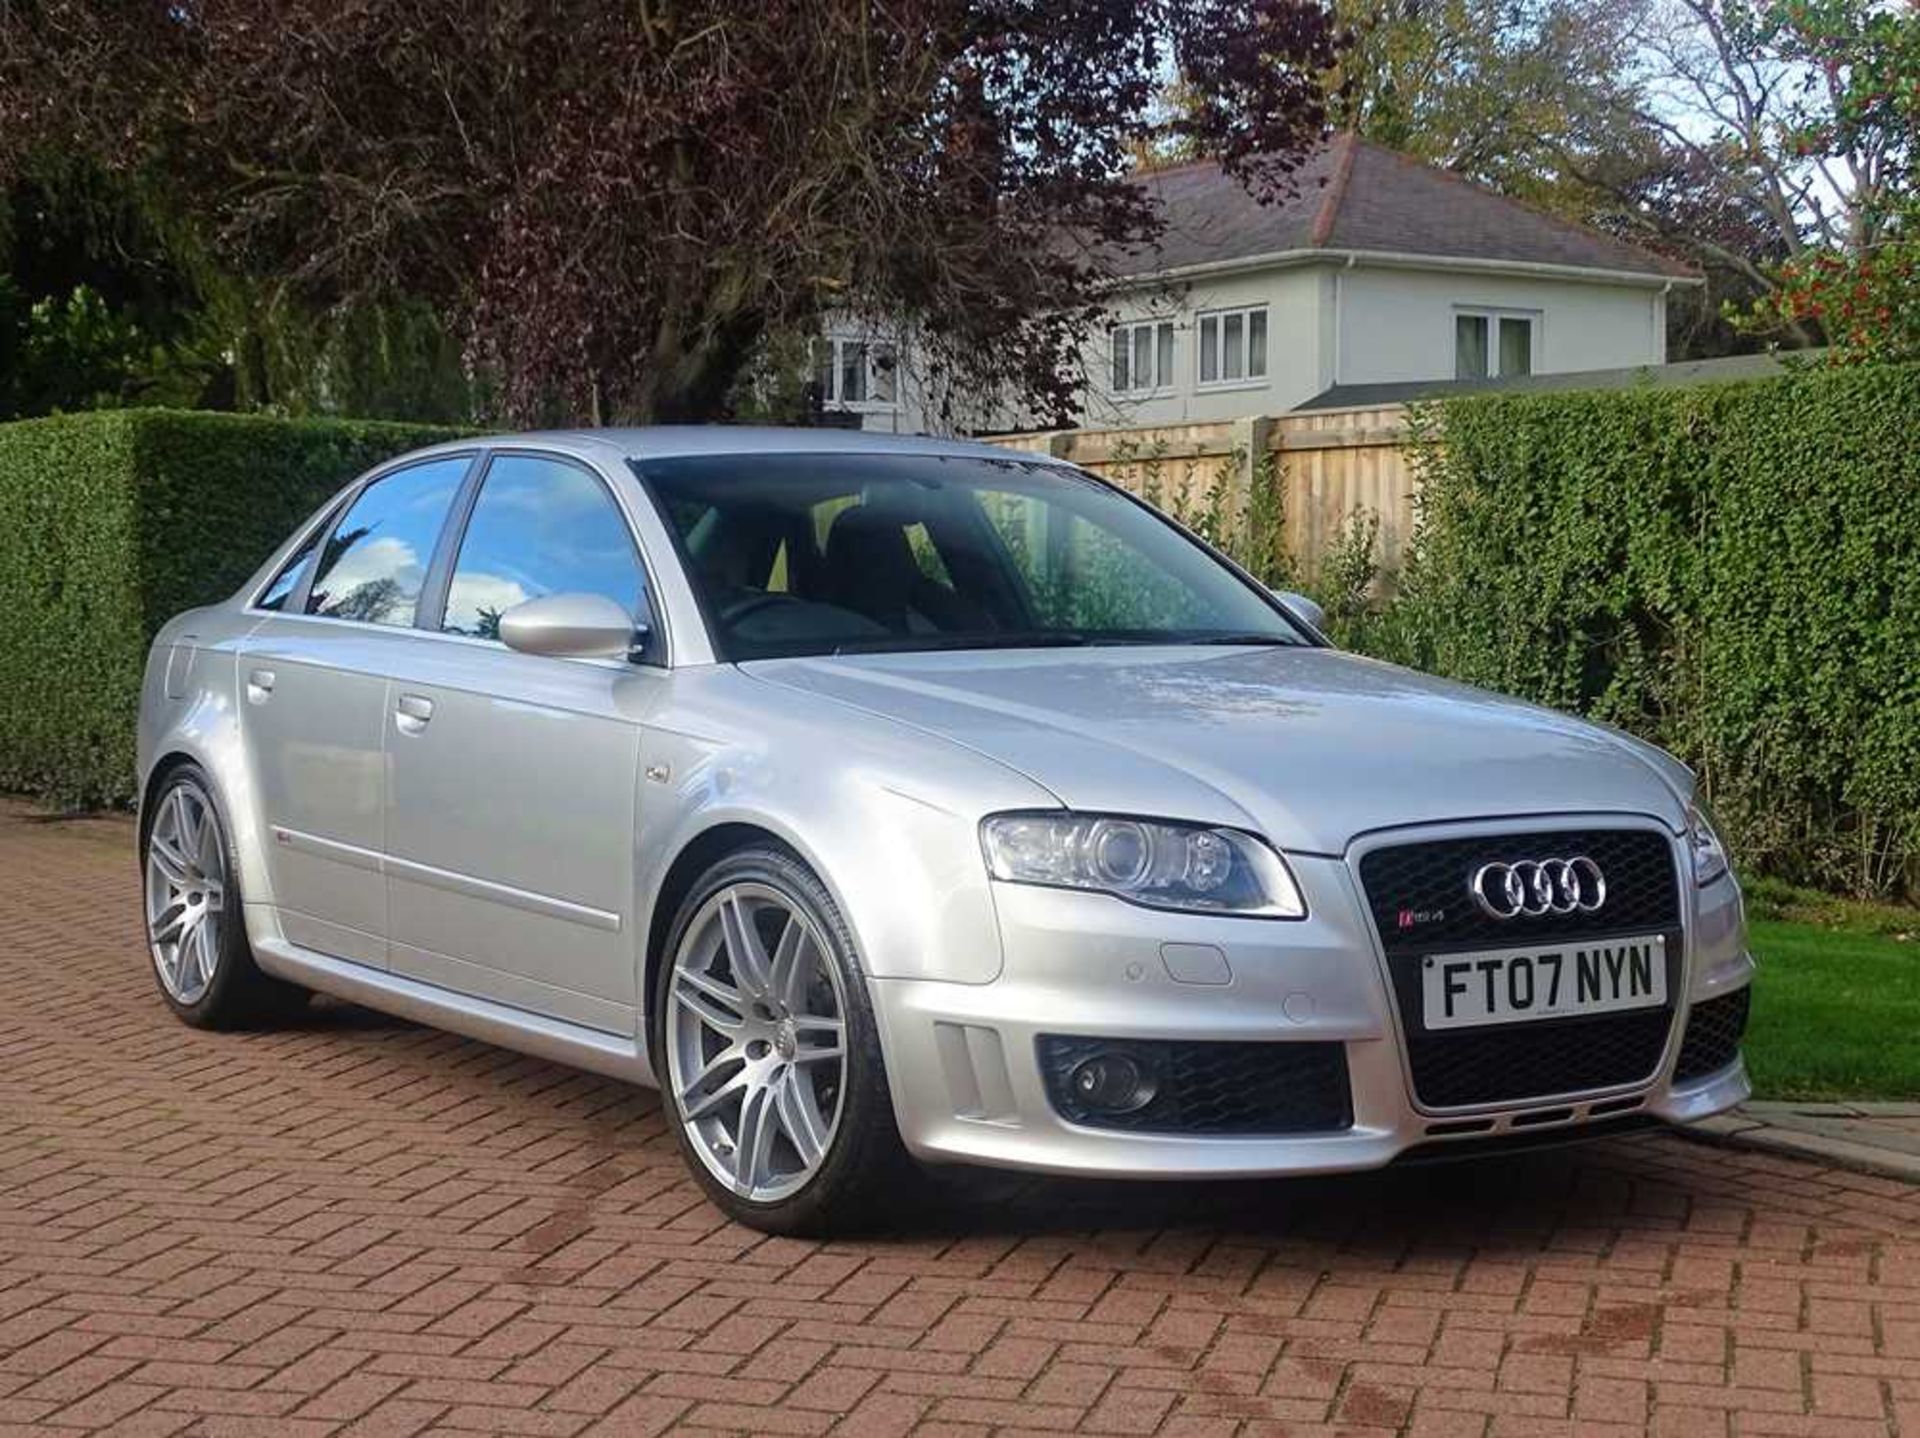 2007 Audi RS4 Saloon One owner and just c.60,000 miles from new - Image 71 of 86